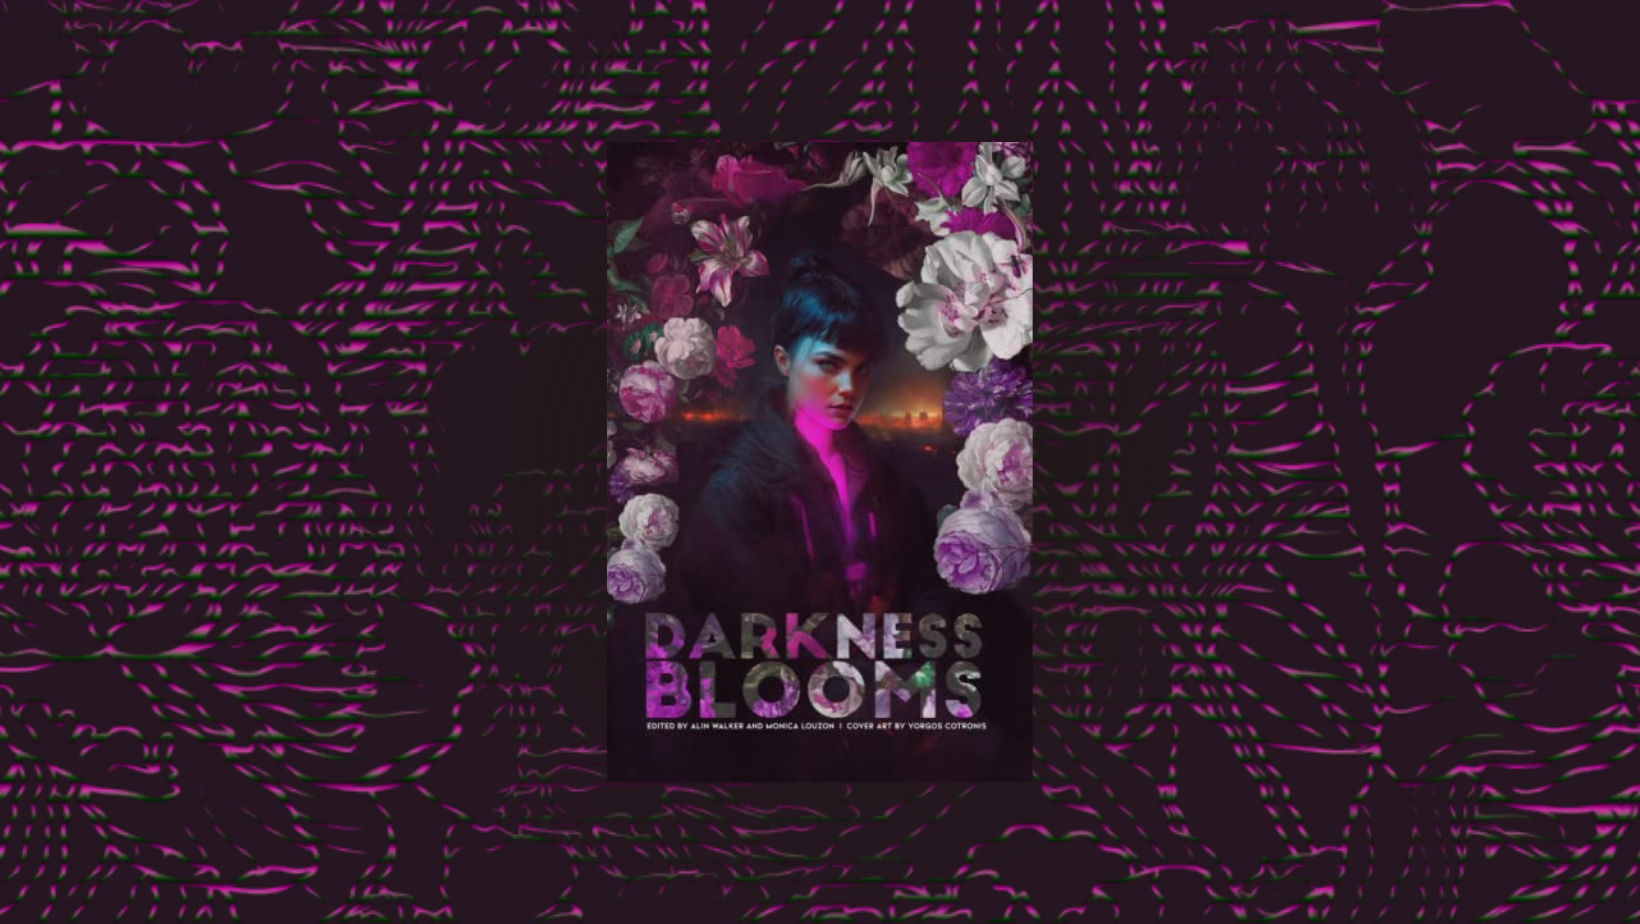 The words Darkness Blooms on a floral background with a woman standing looking at the viewer